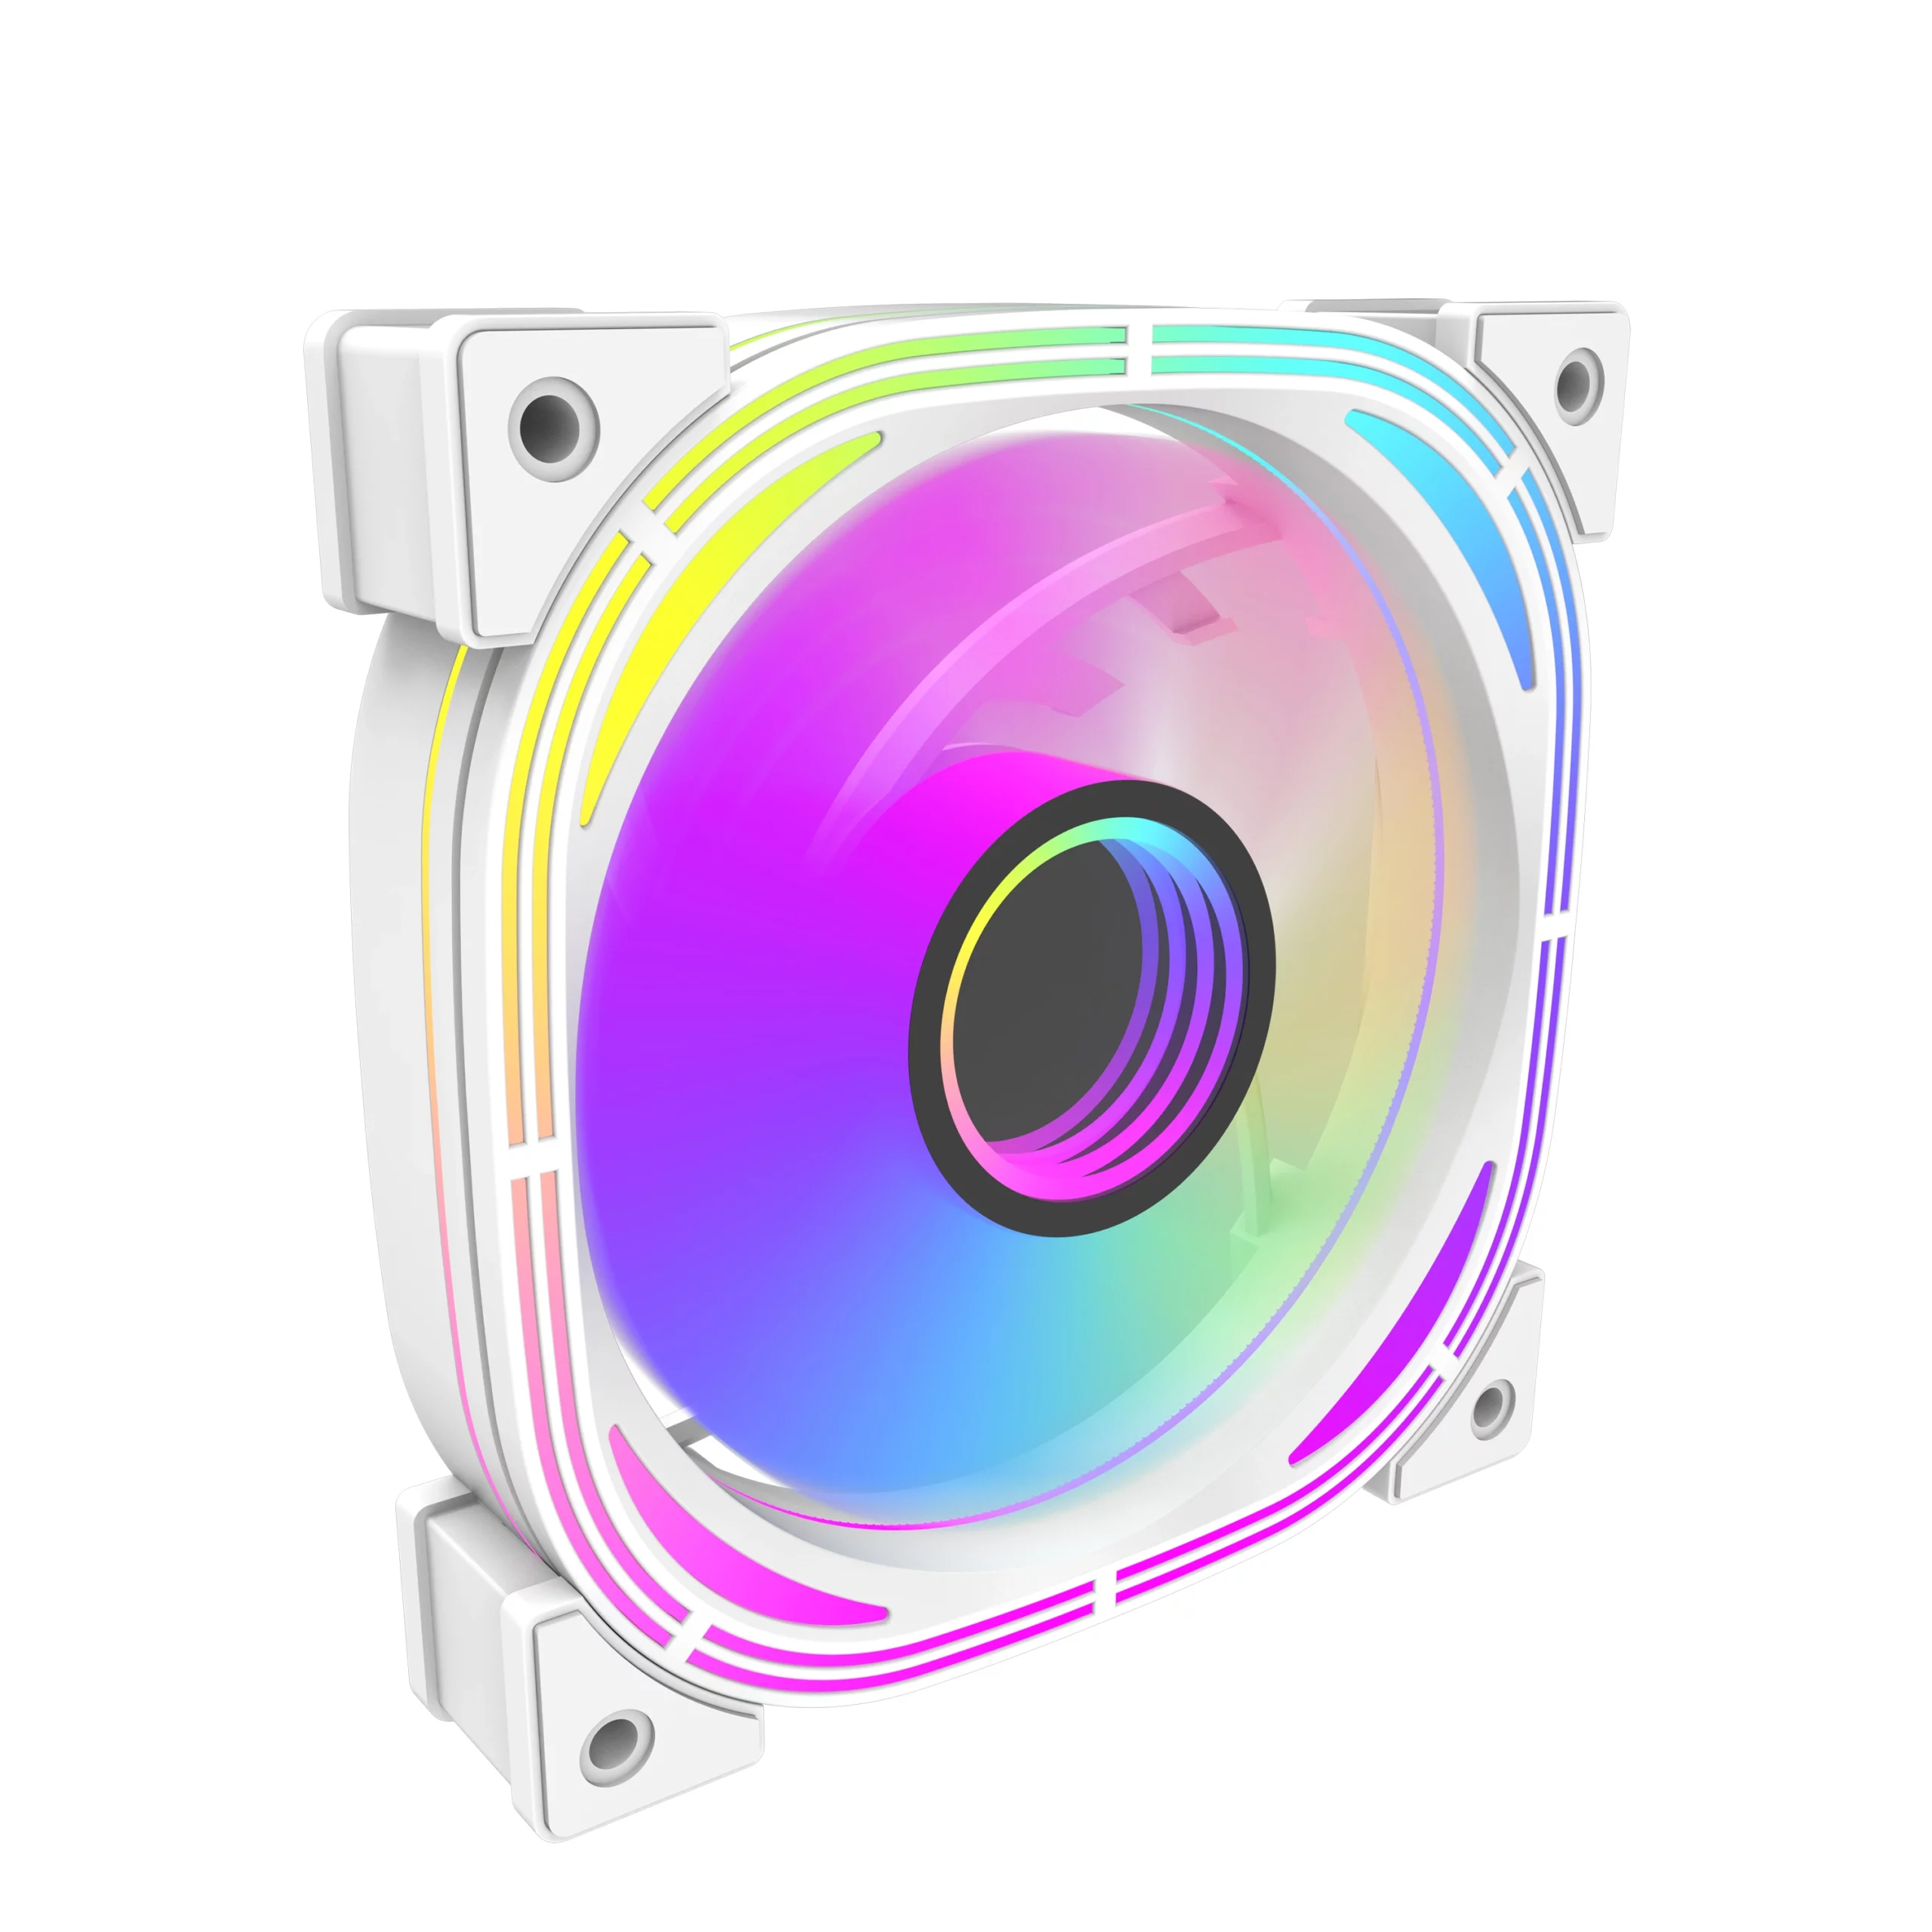 DarkFlash INFINITY 24 Pro A-RGB Cooling Fan 3 in 1 - Black | White - Cooling Systems